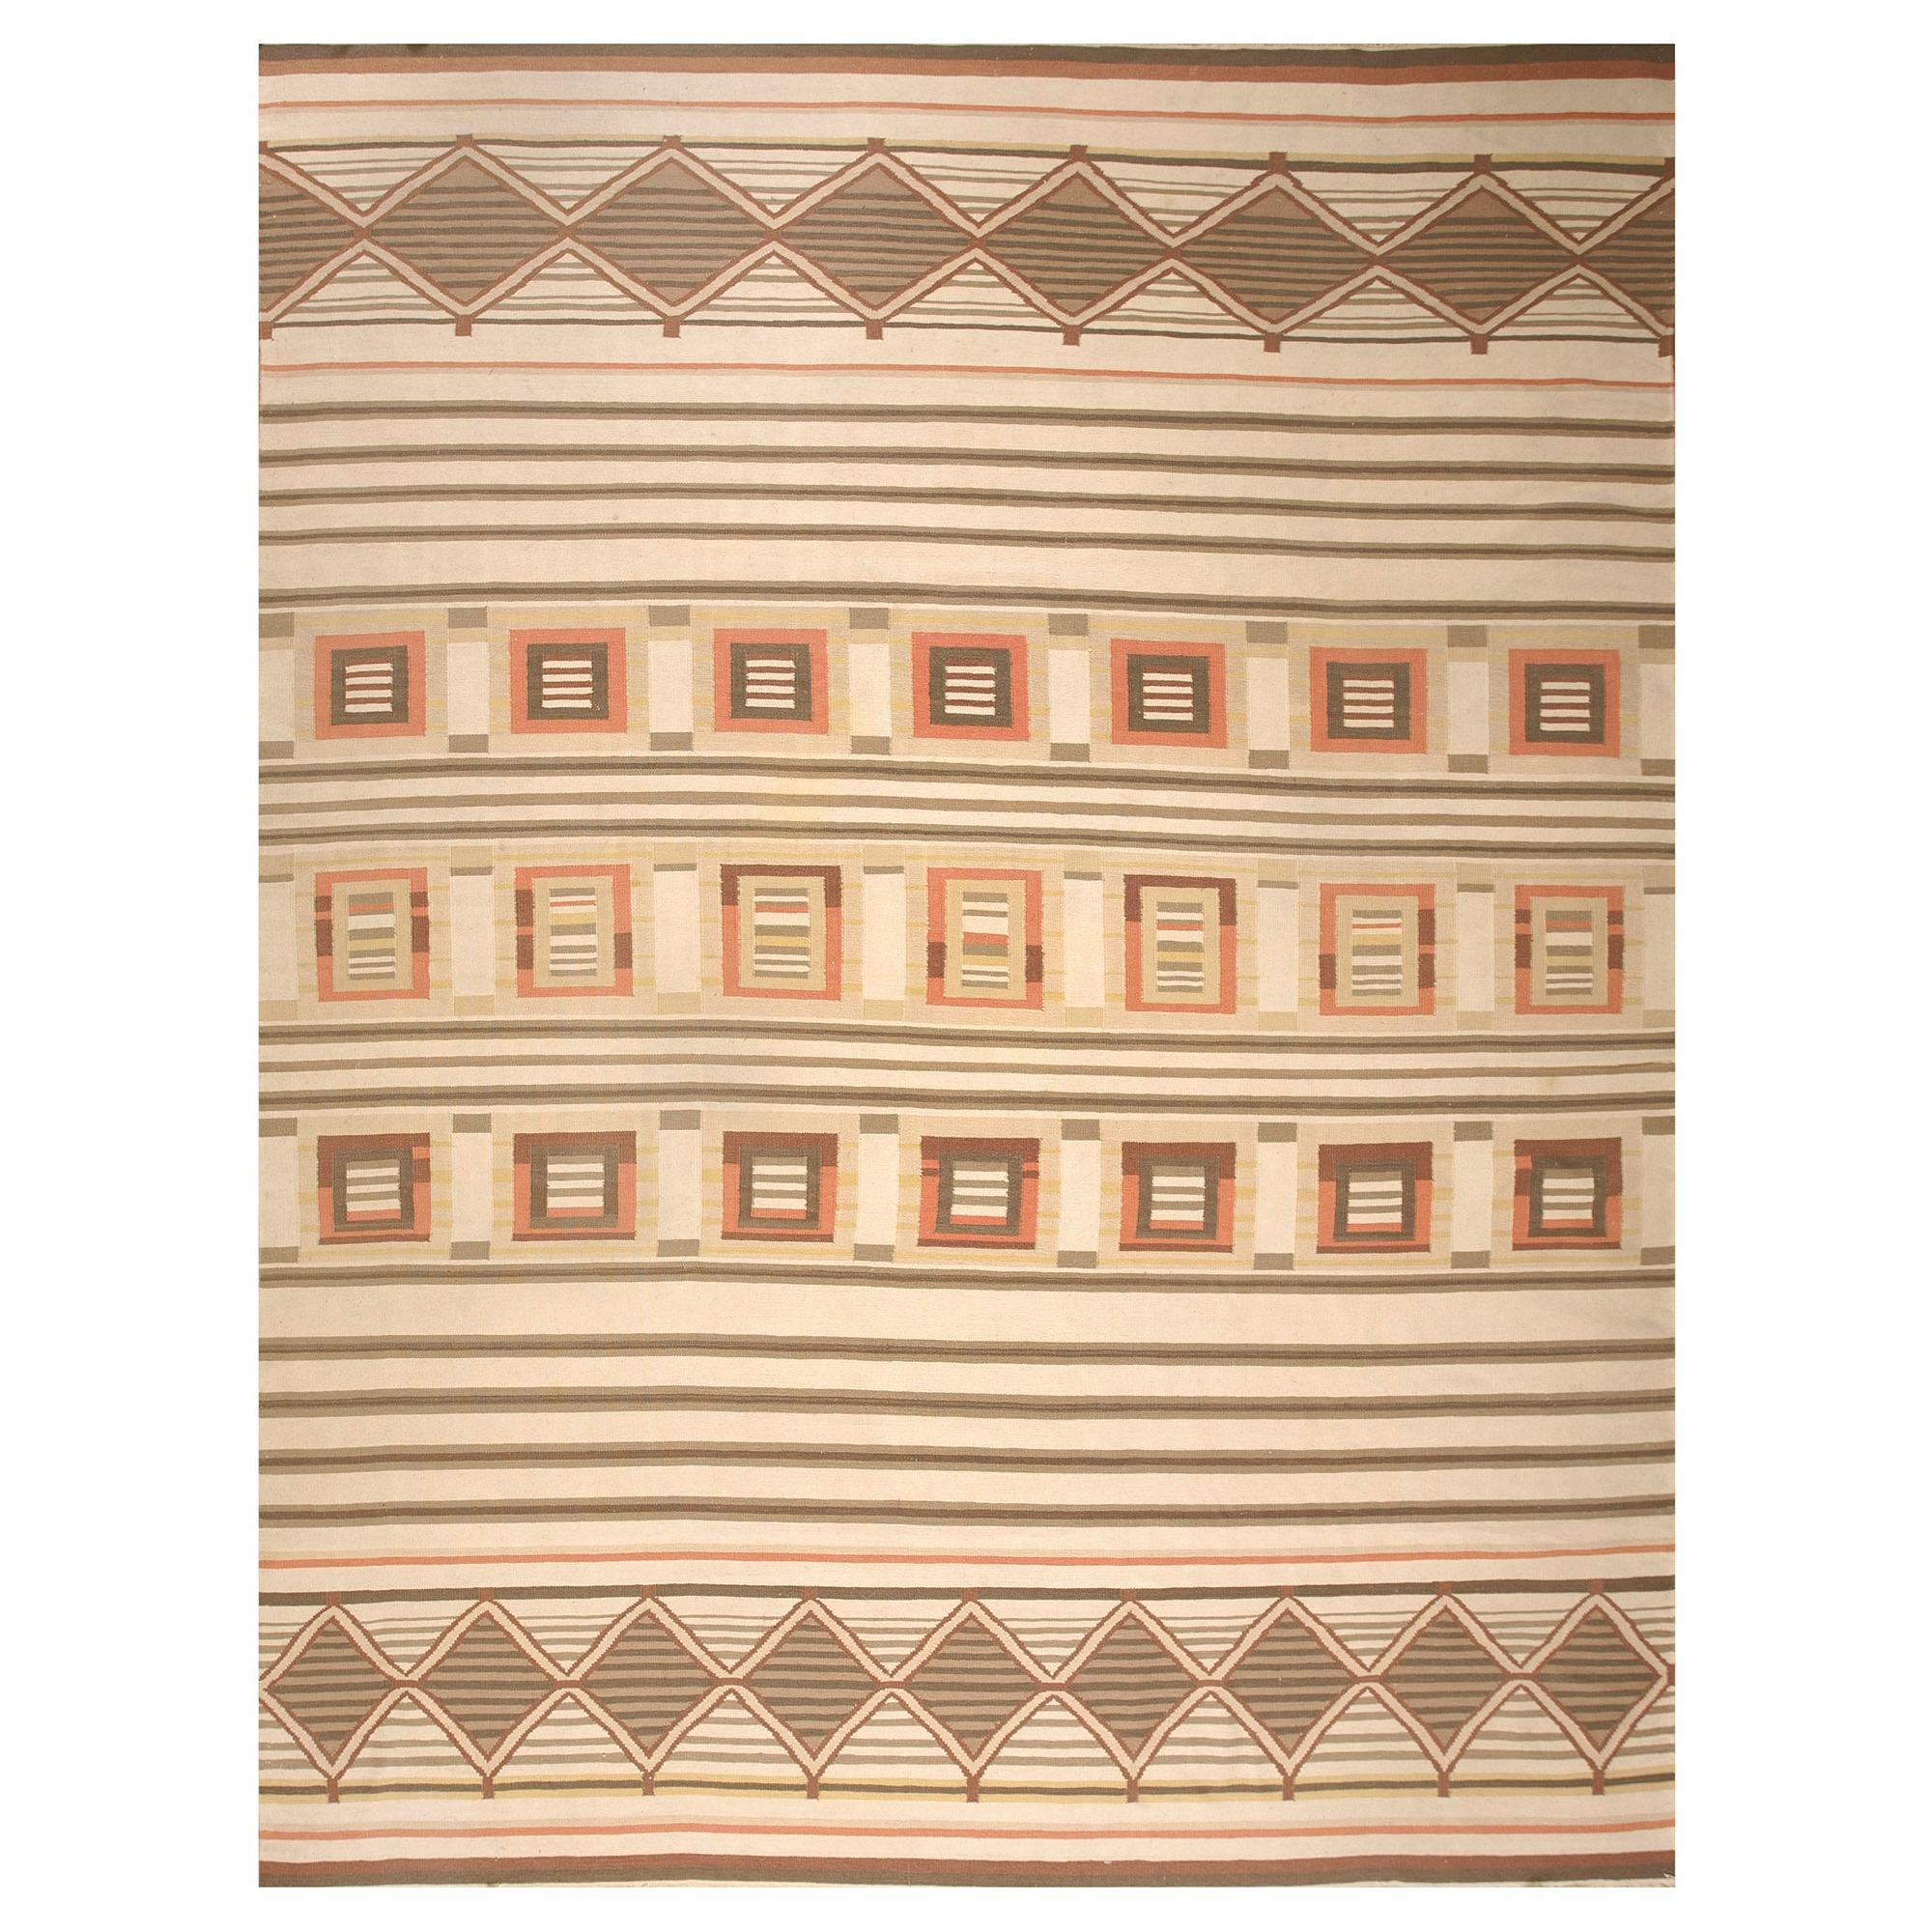 Mid 20th Century Indian Dhurrie Carpet ( 9' x 11'8" - 275 x 355 )